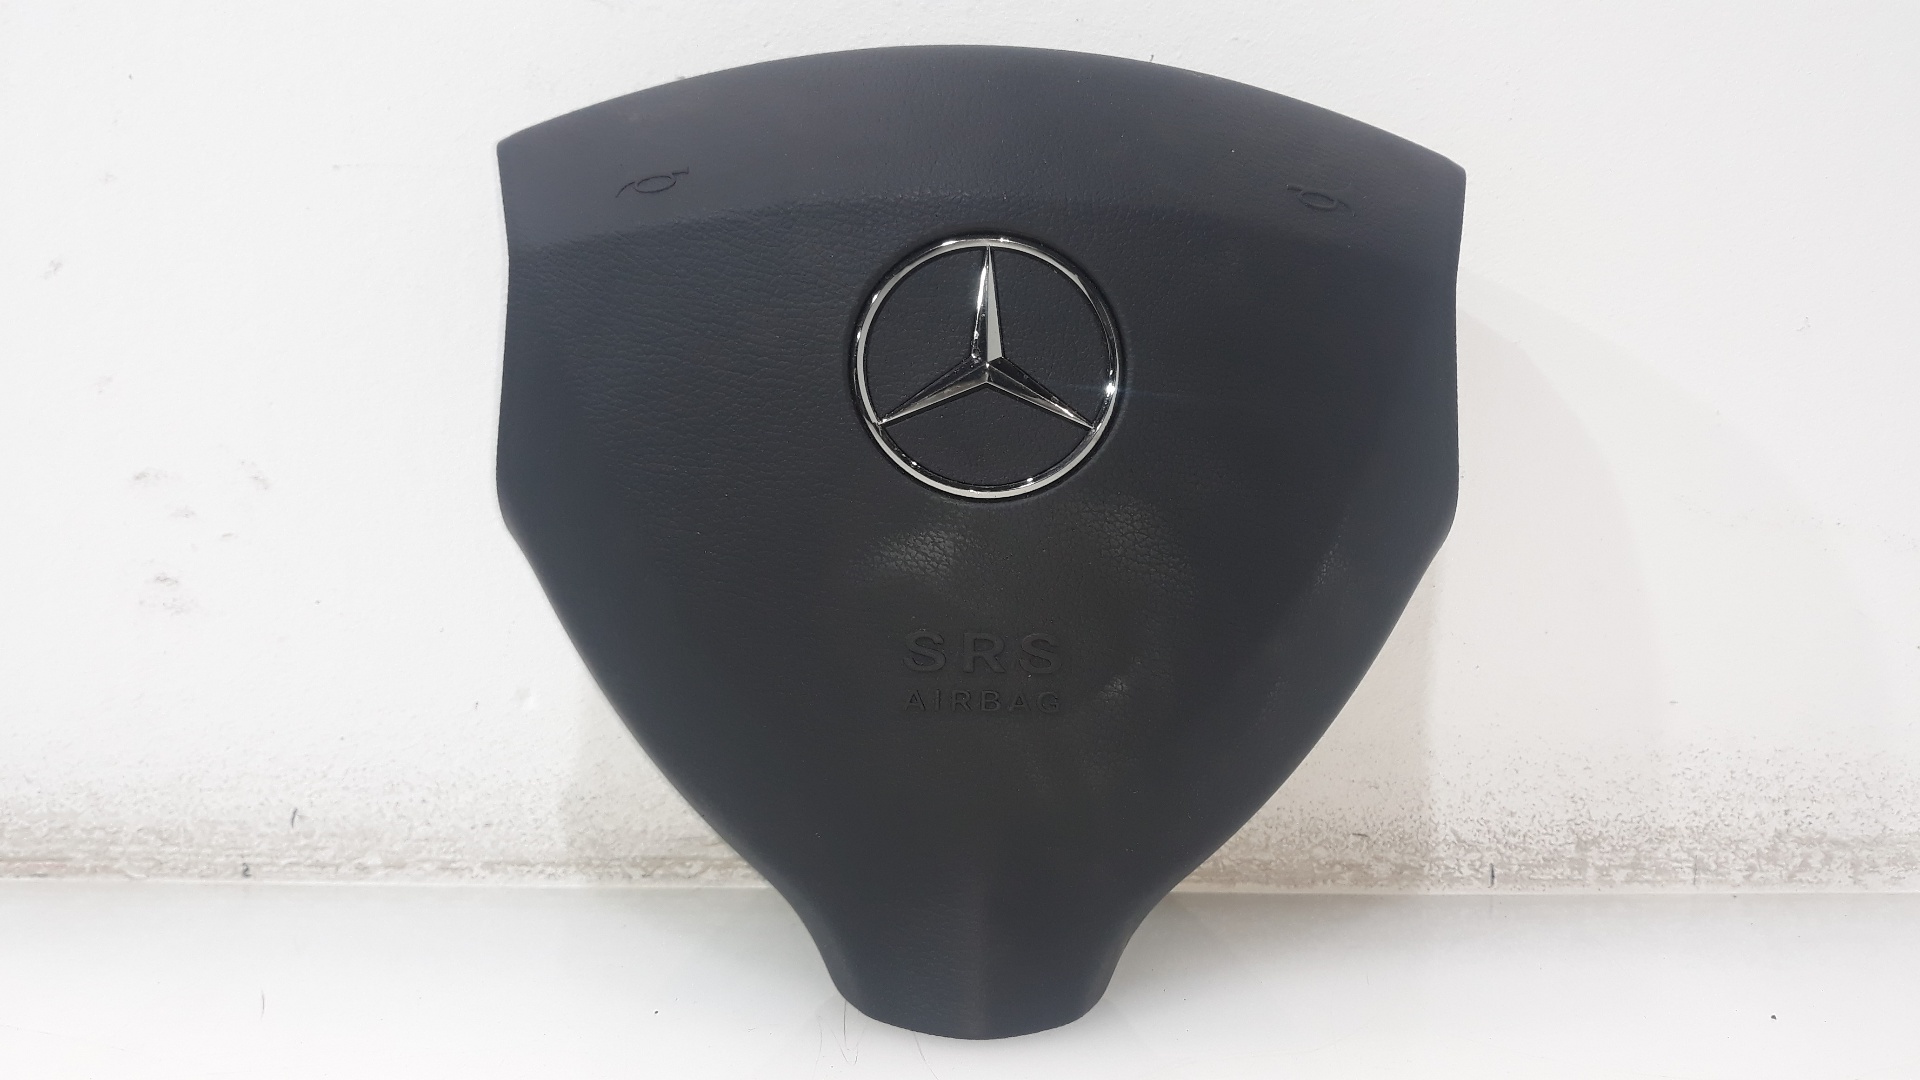 MERCEDES-BENZ A-Class W169 (2004-2012) Other Control Units 311127596162AE, 311127596162AE 25198577